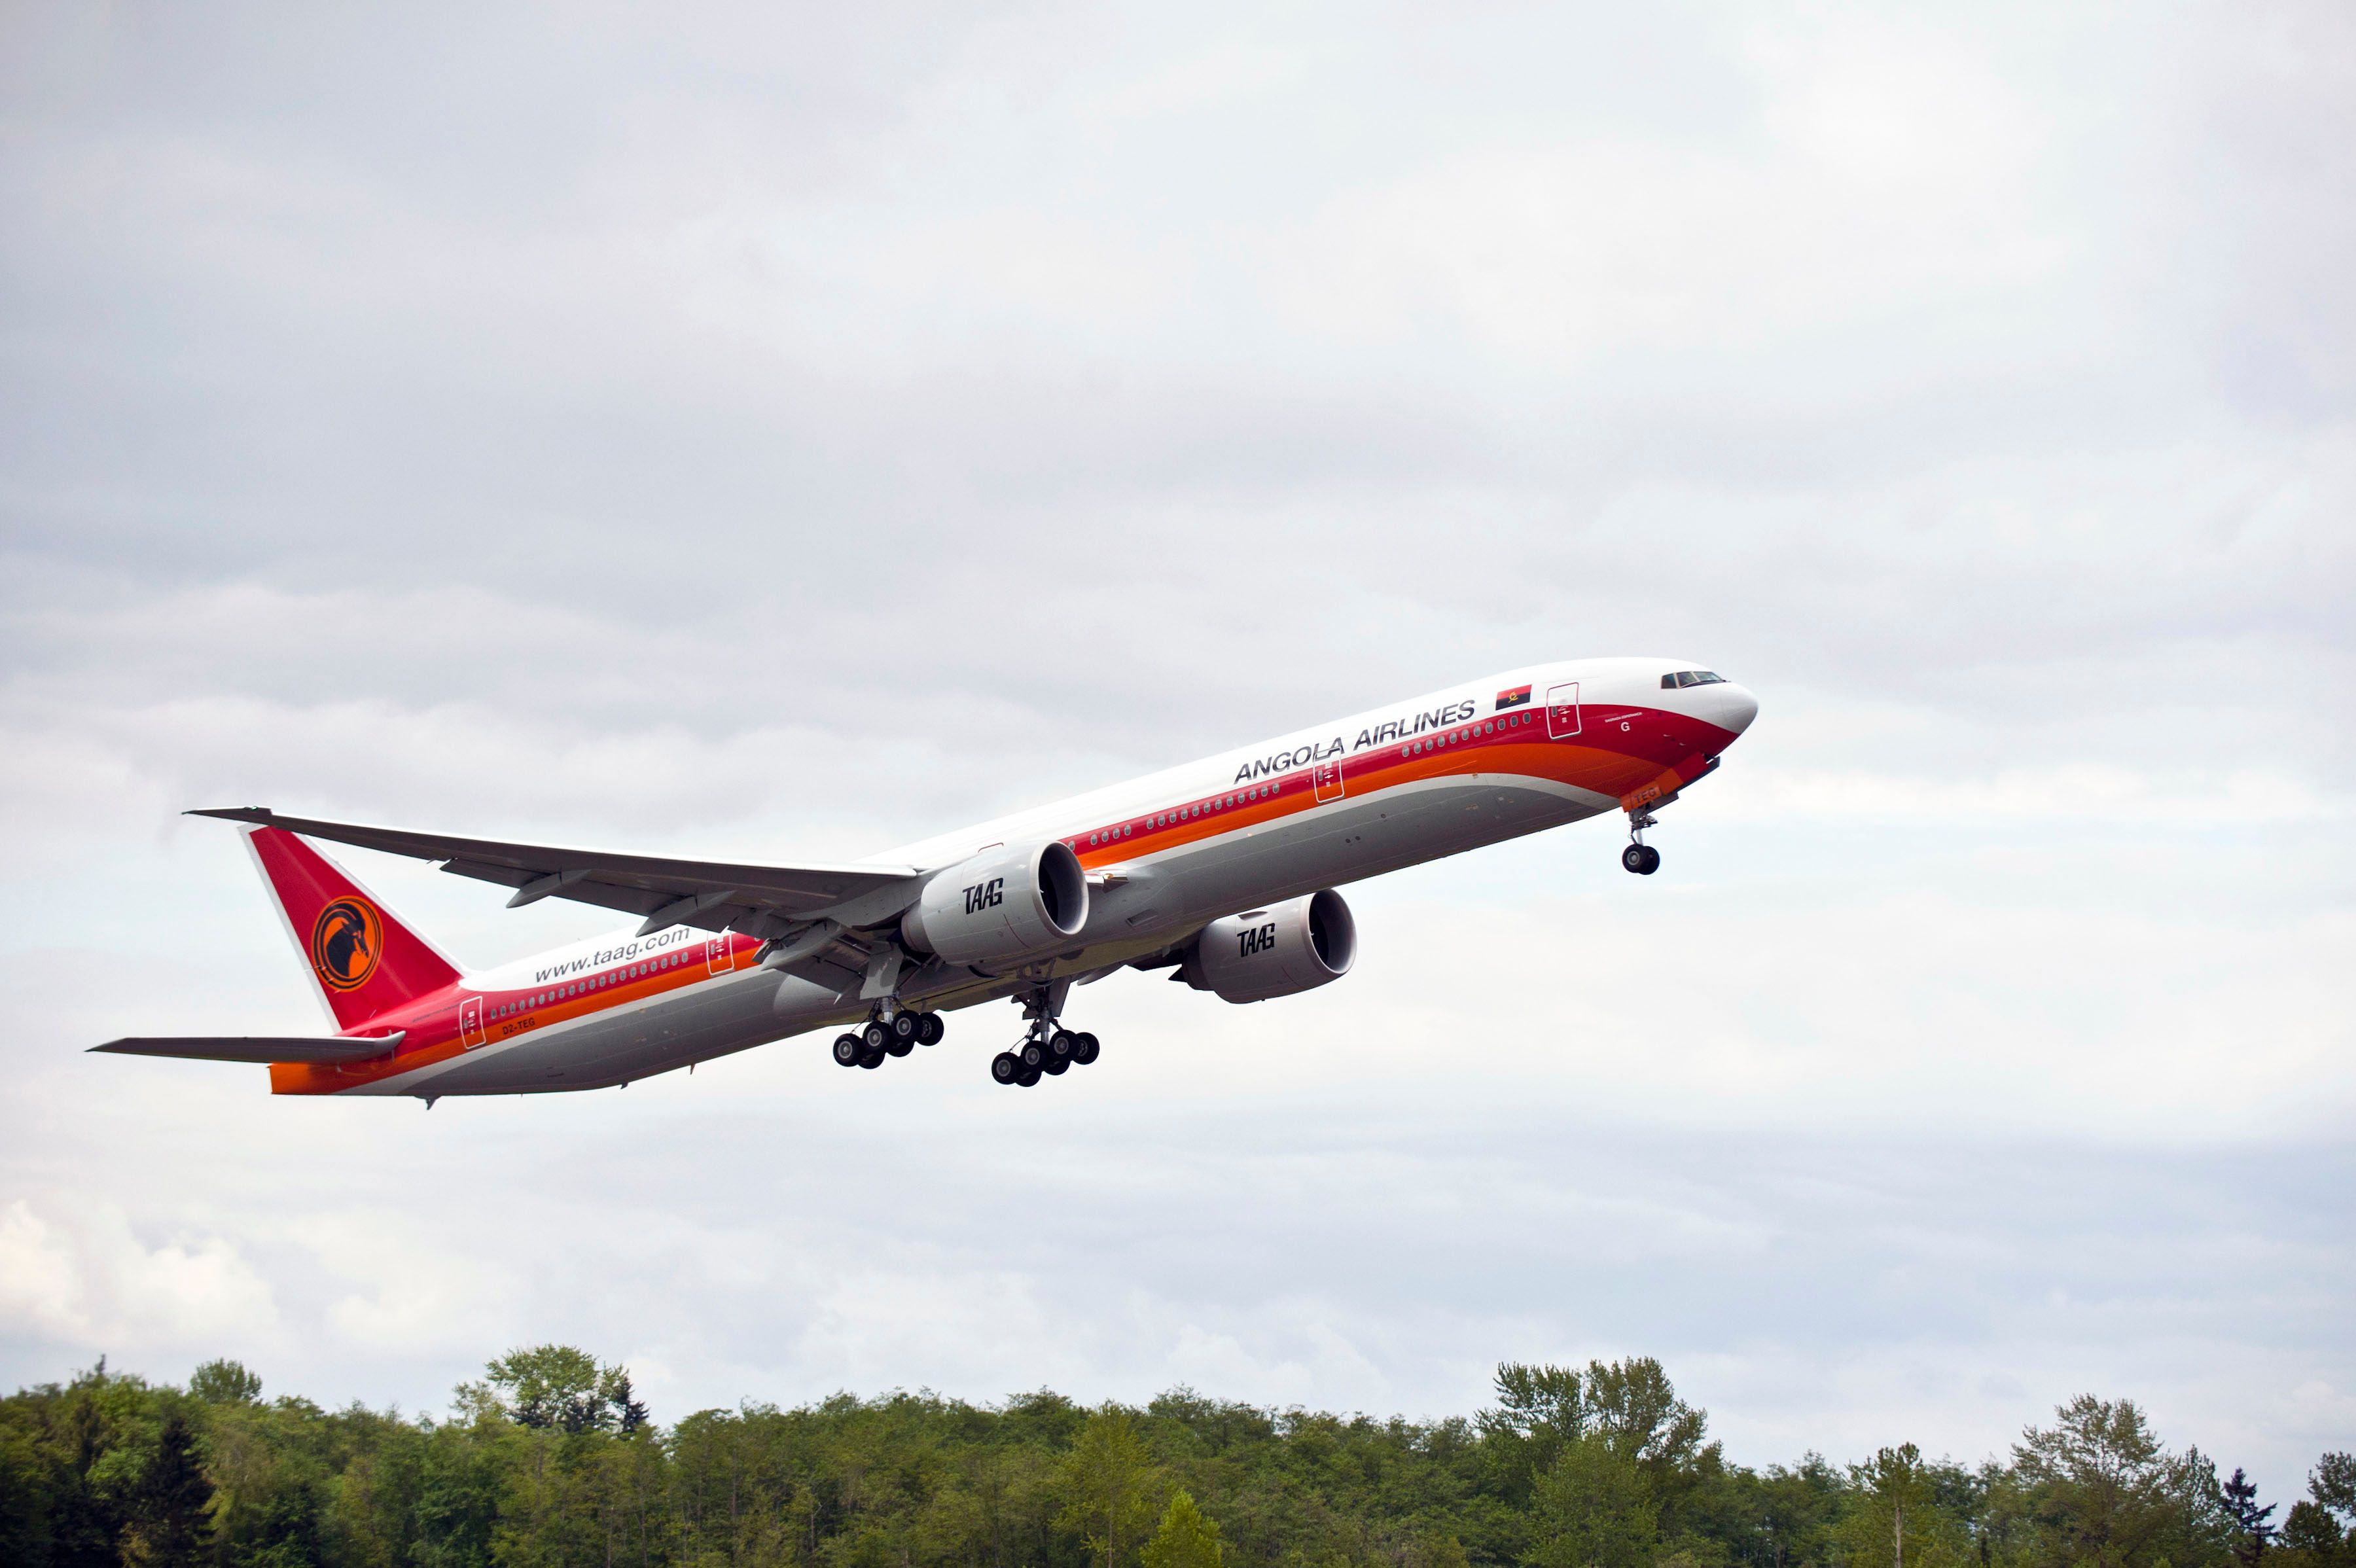 A Taag Angola Airlines Boeing 777 Taking Off.